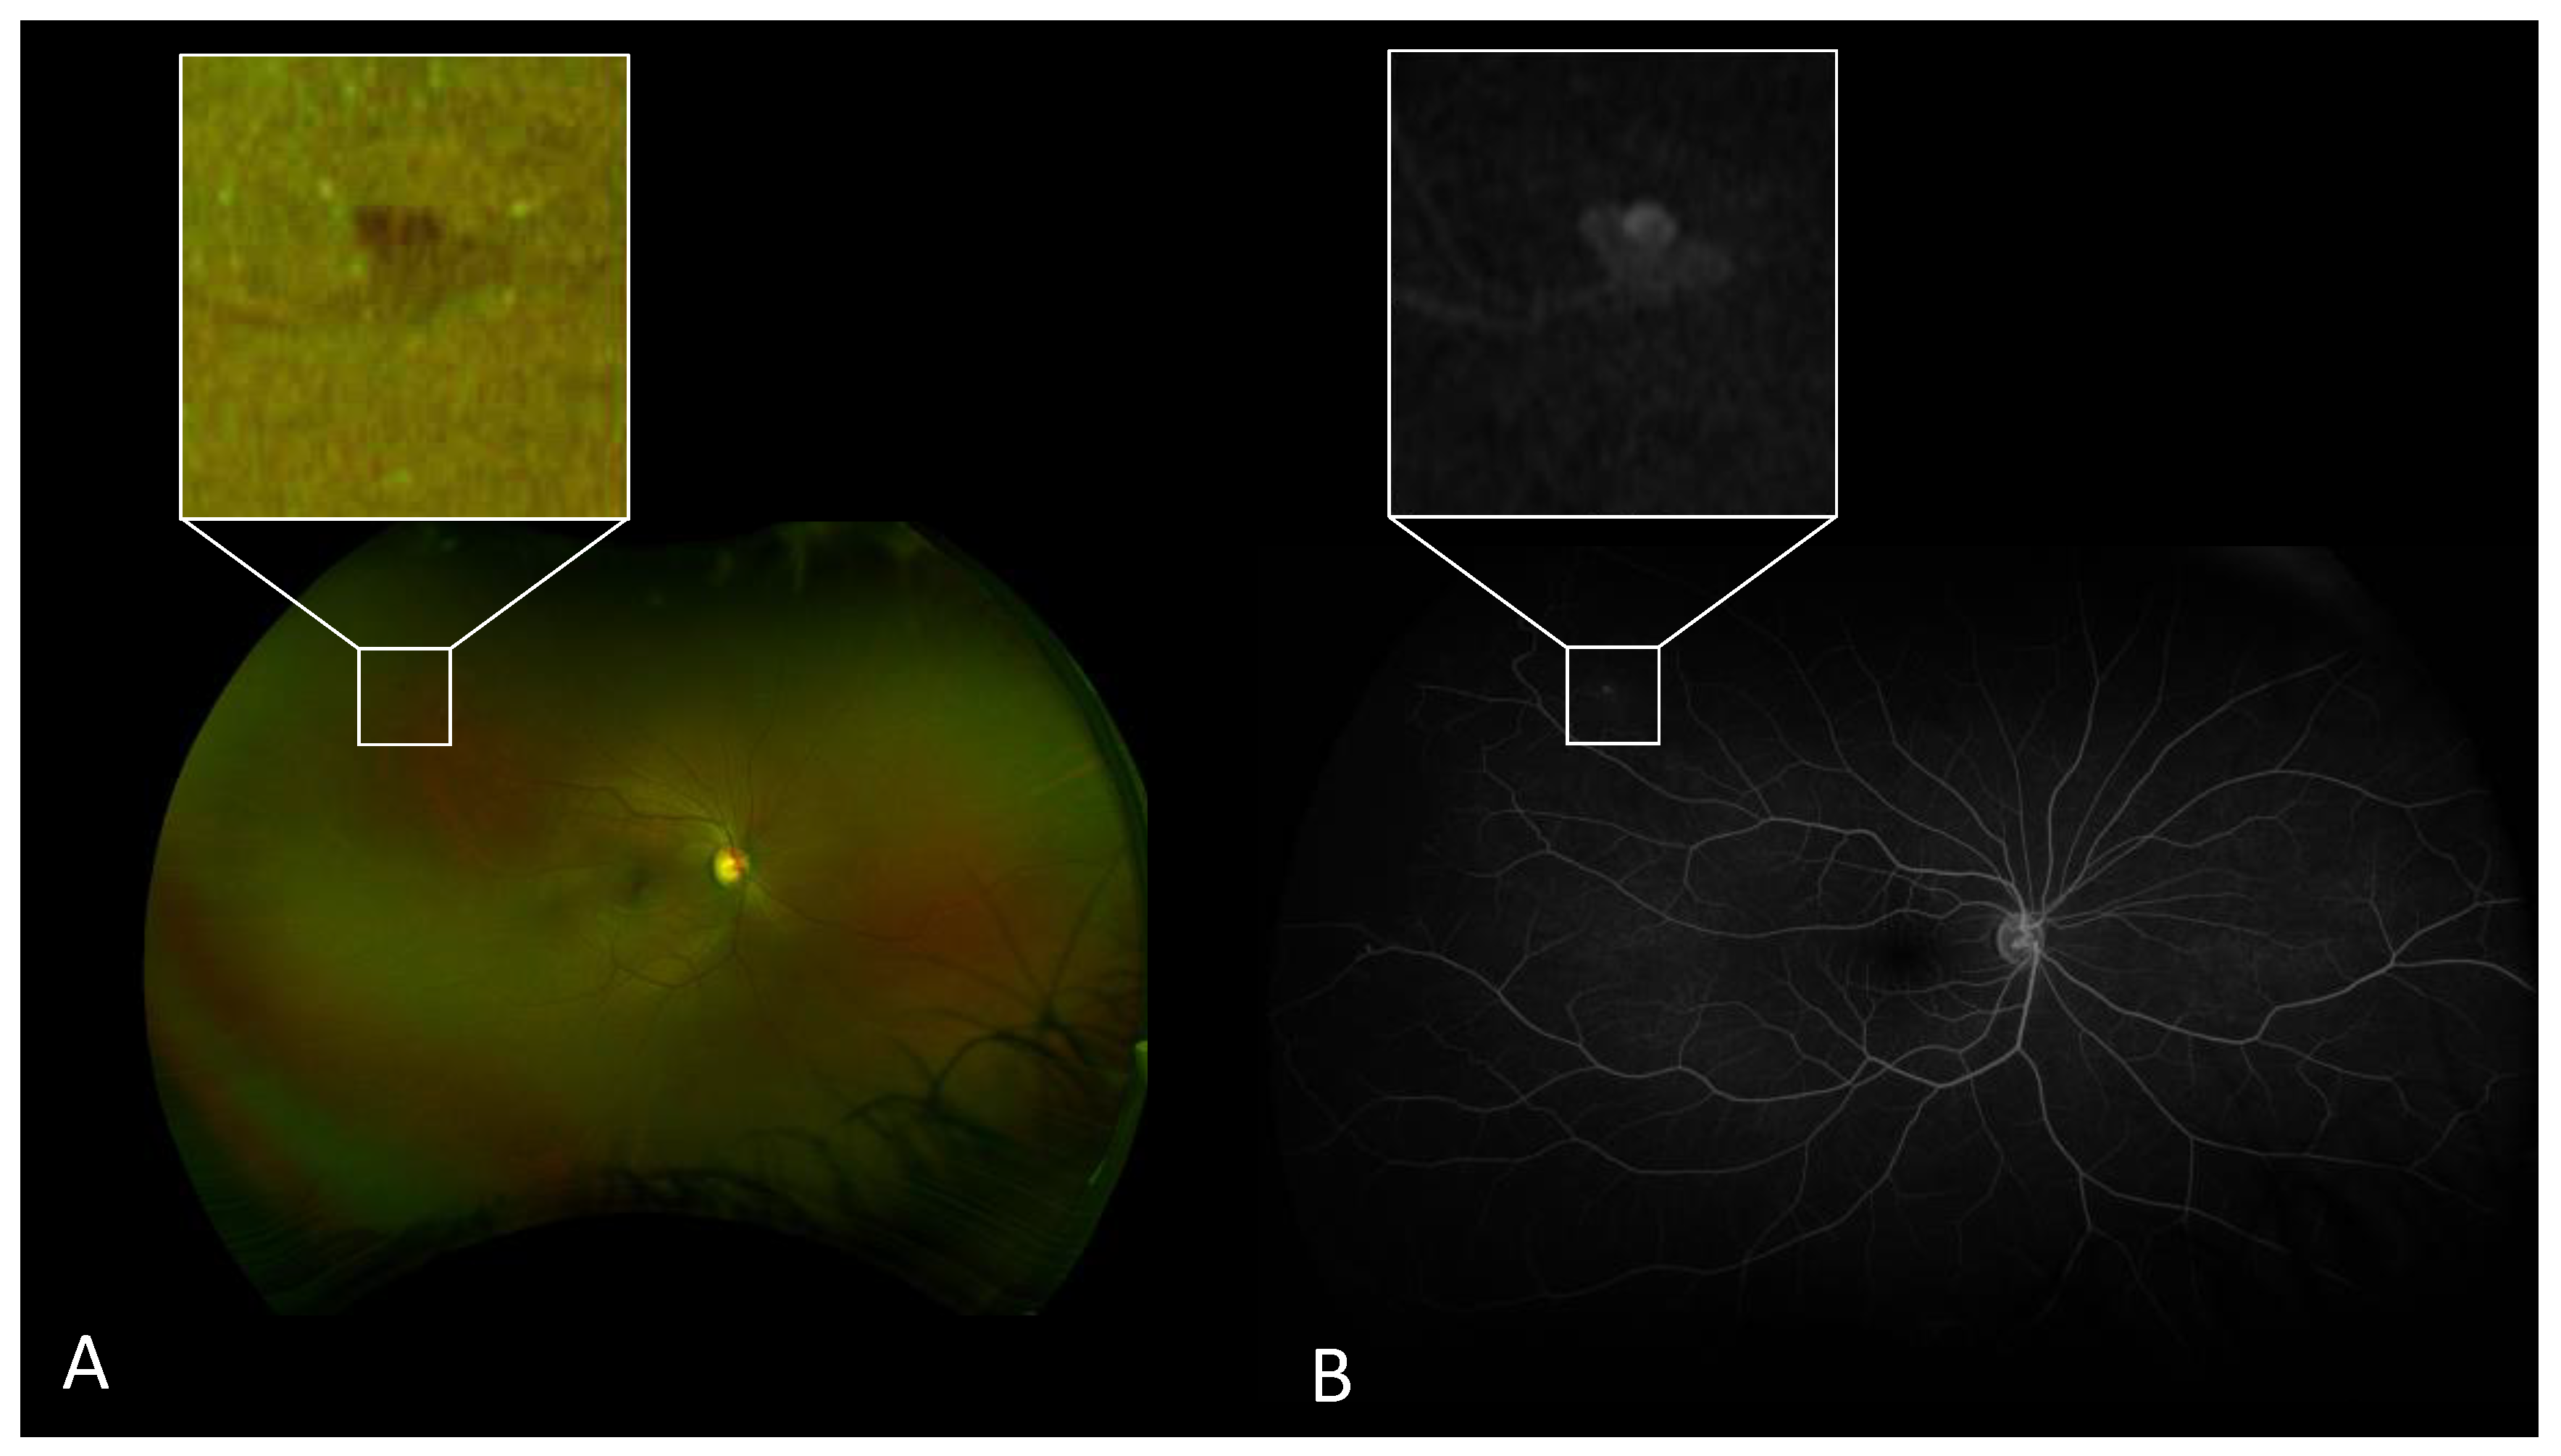 Jcm Free Full Text Sensitivity And Specificity Of Ultrawide Field Fundus Photography For The Staging Of Sickle Cell Retinopathy In Real Life Practice At Varying Expertise Level Html